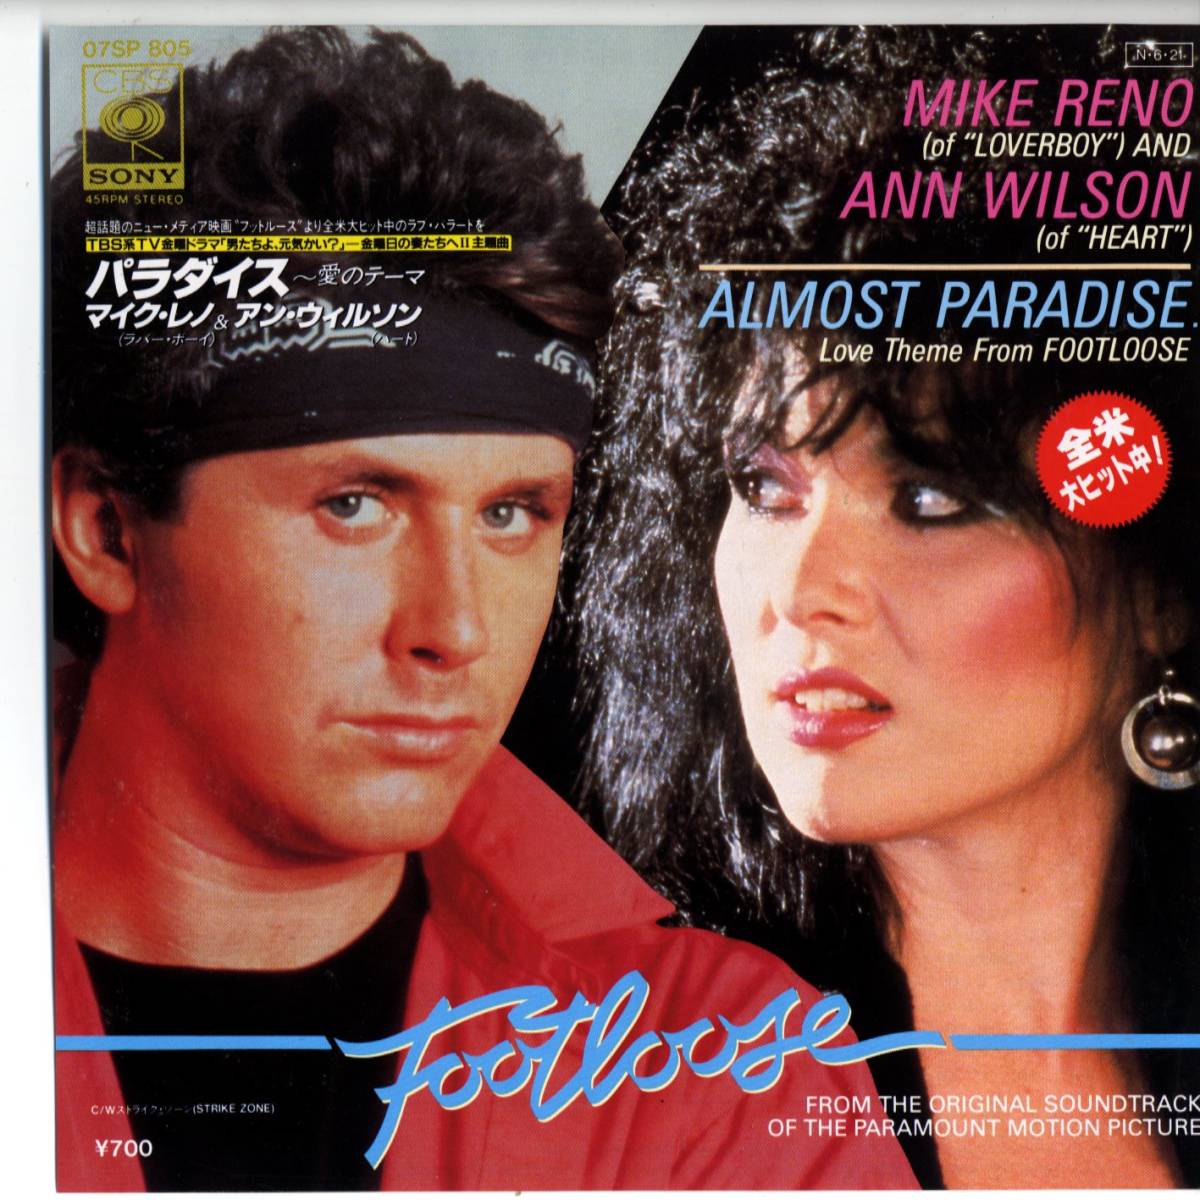 Mike Reno & Ann Wilson . Almost Paradise - will always love this